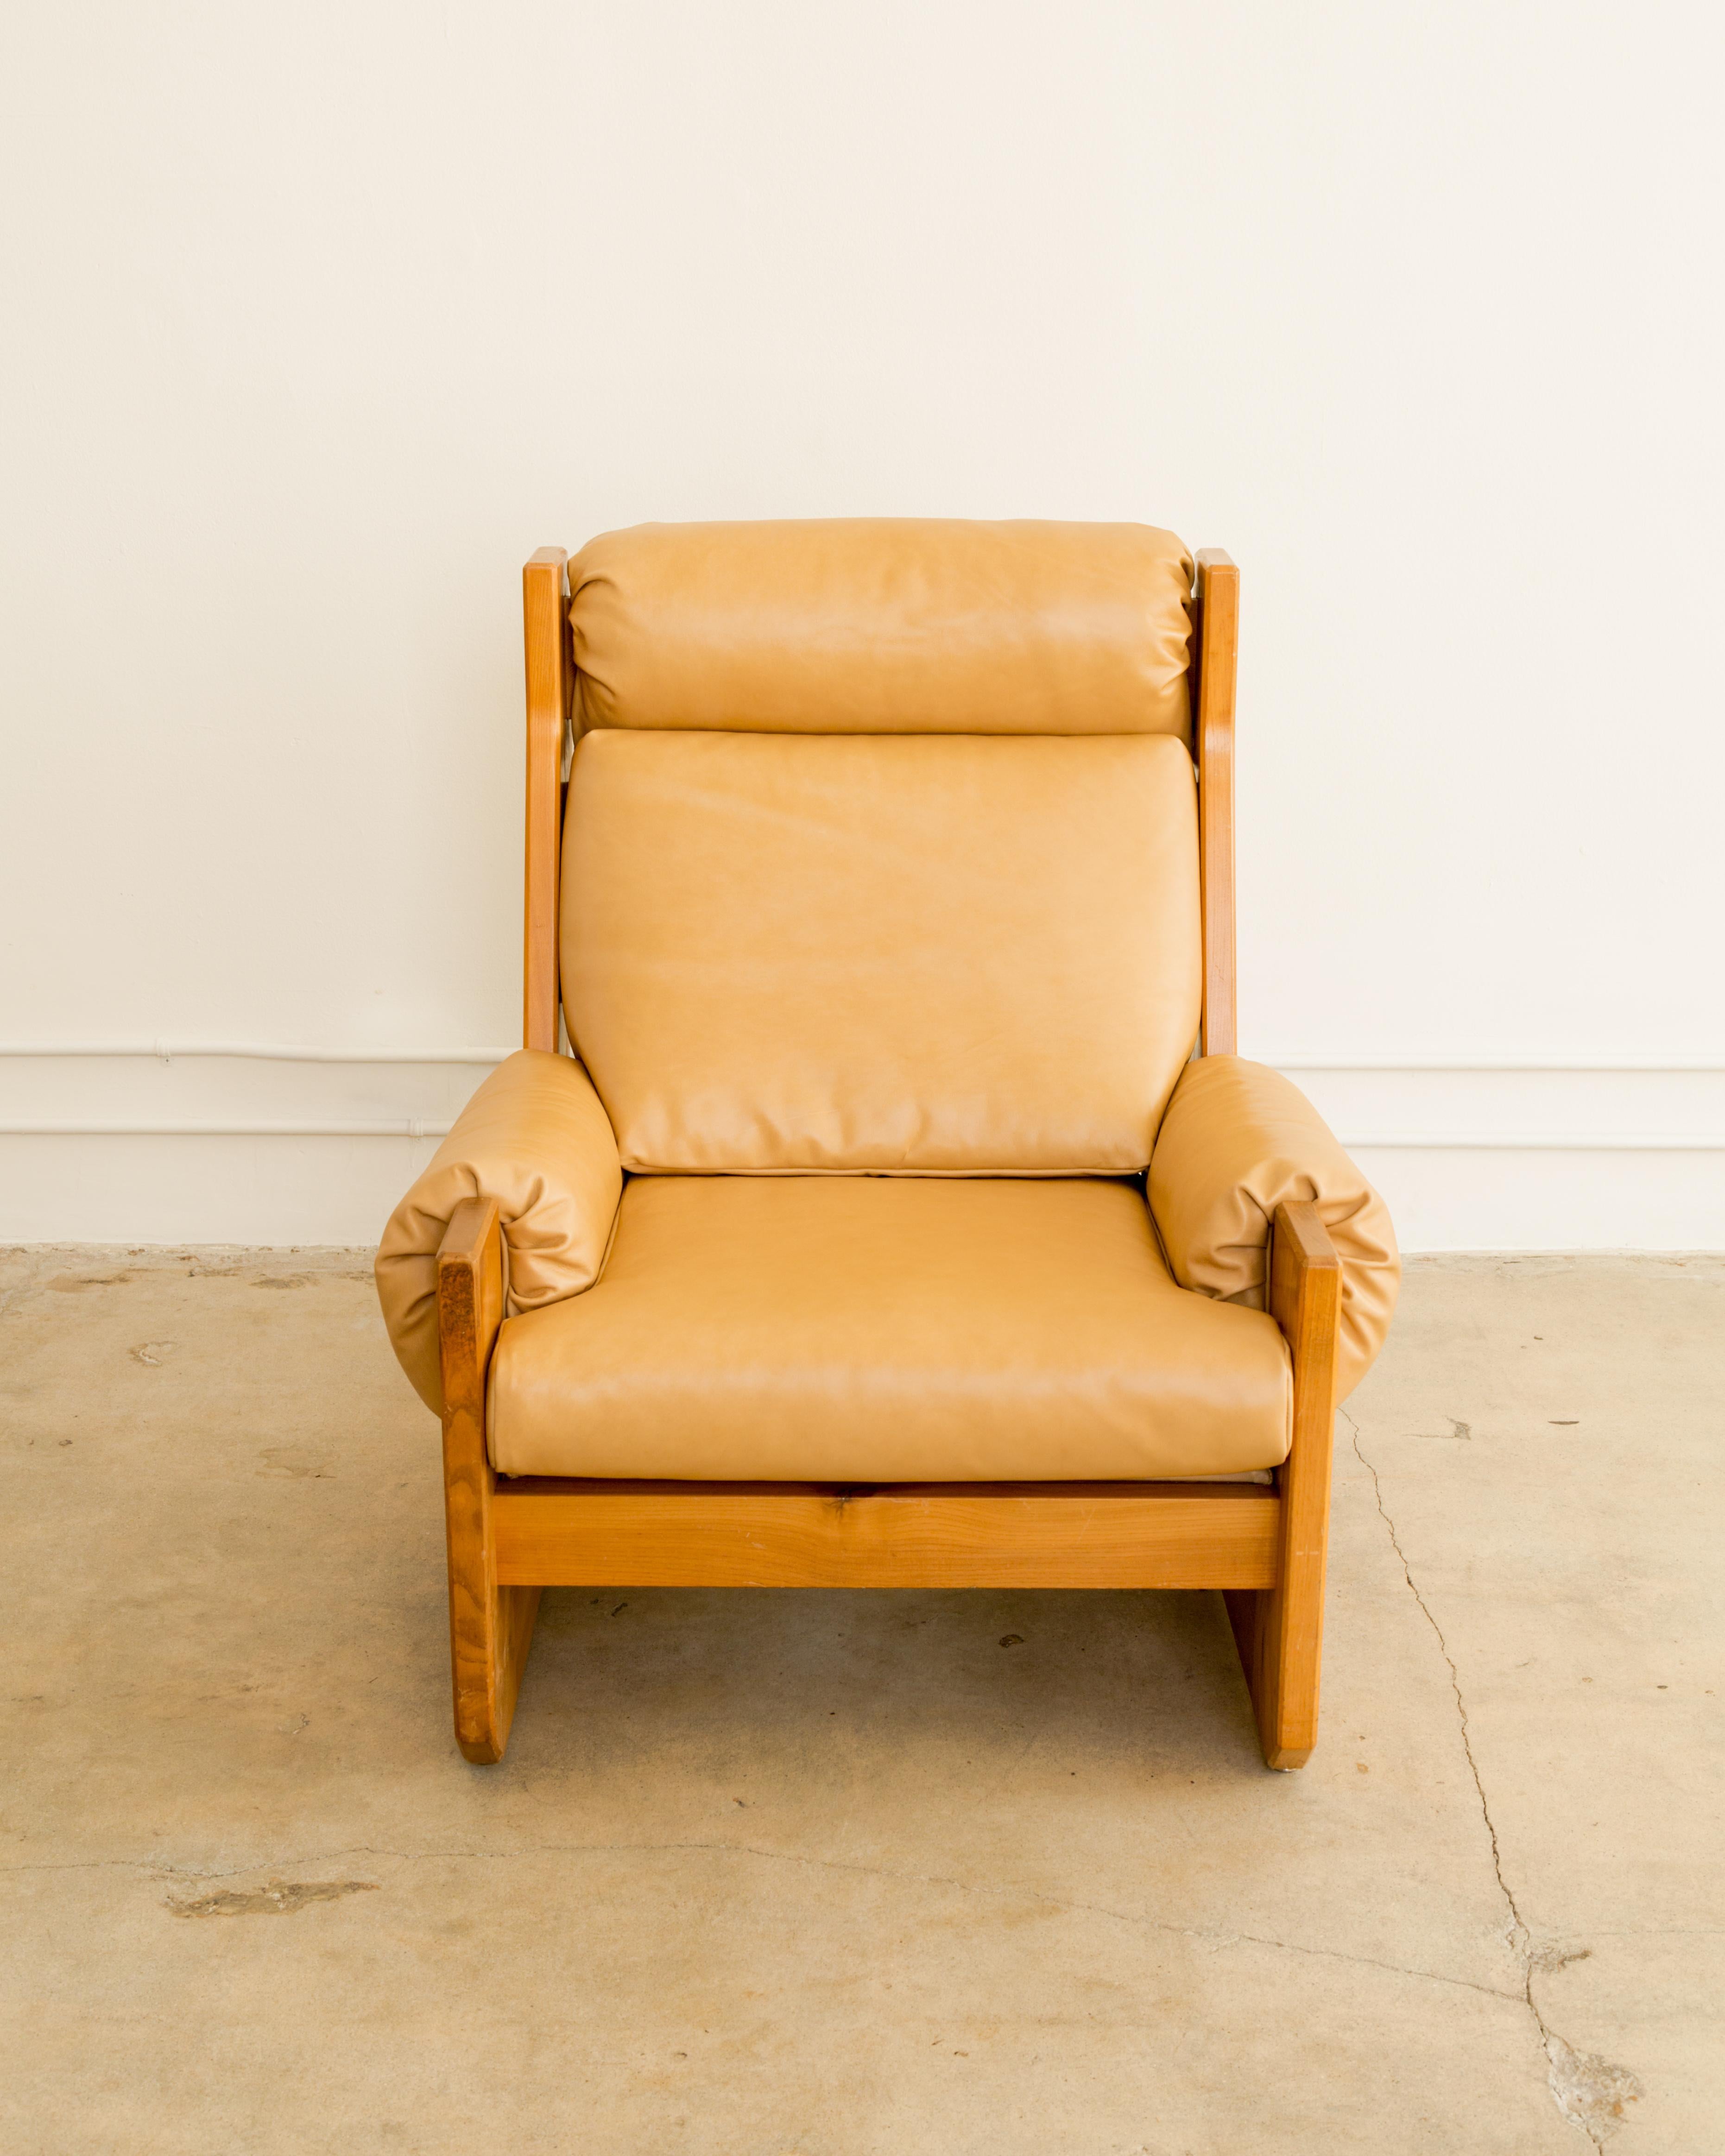 High back leather and elm wood club chair, newly leather upholstery and fill, by Maison Regain, solid, sturdy and stylish, France circa 1960's.